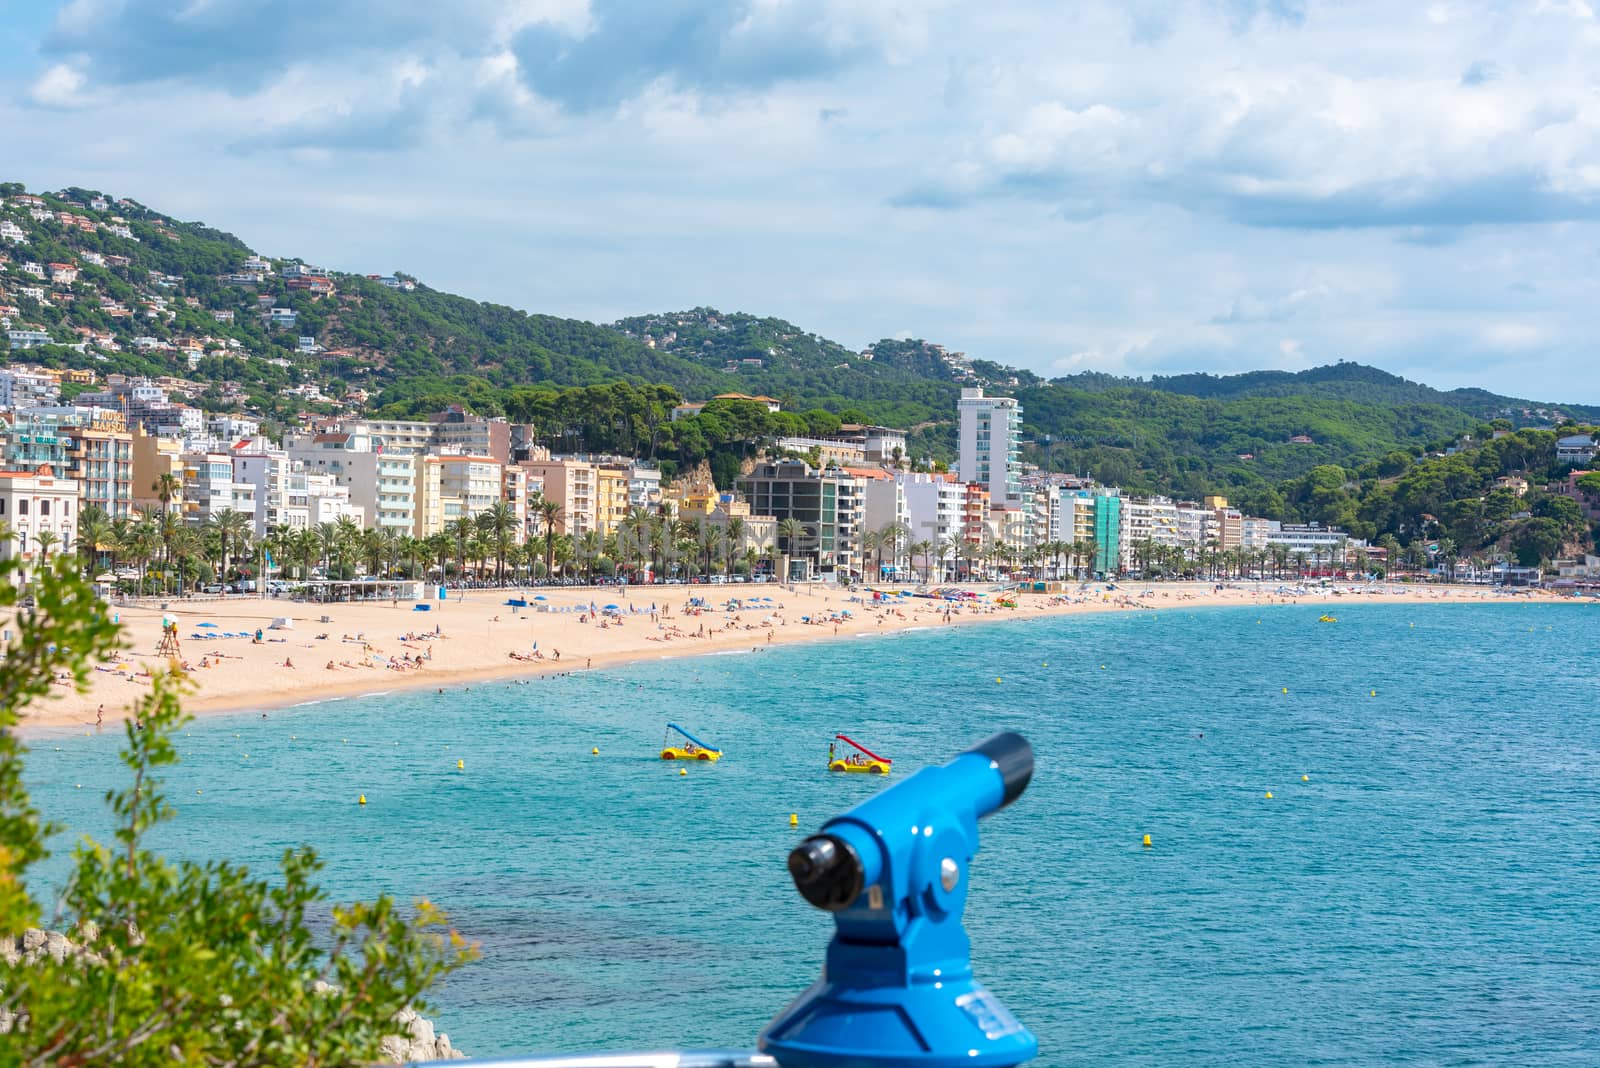 Beach of Lloret de Mar after Covid 19 without international tourists in summer 2020.